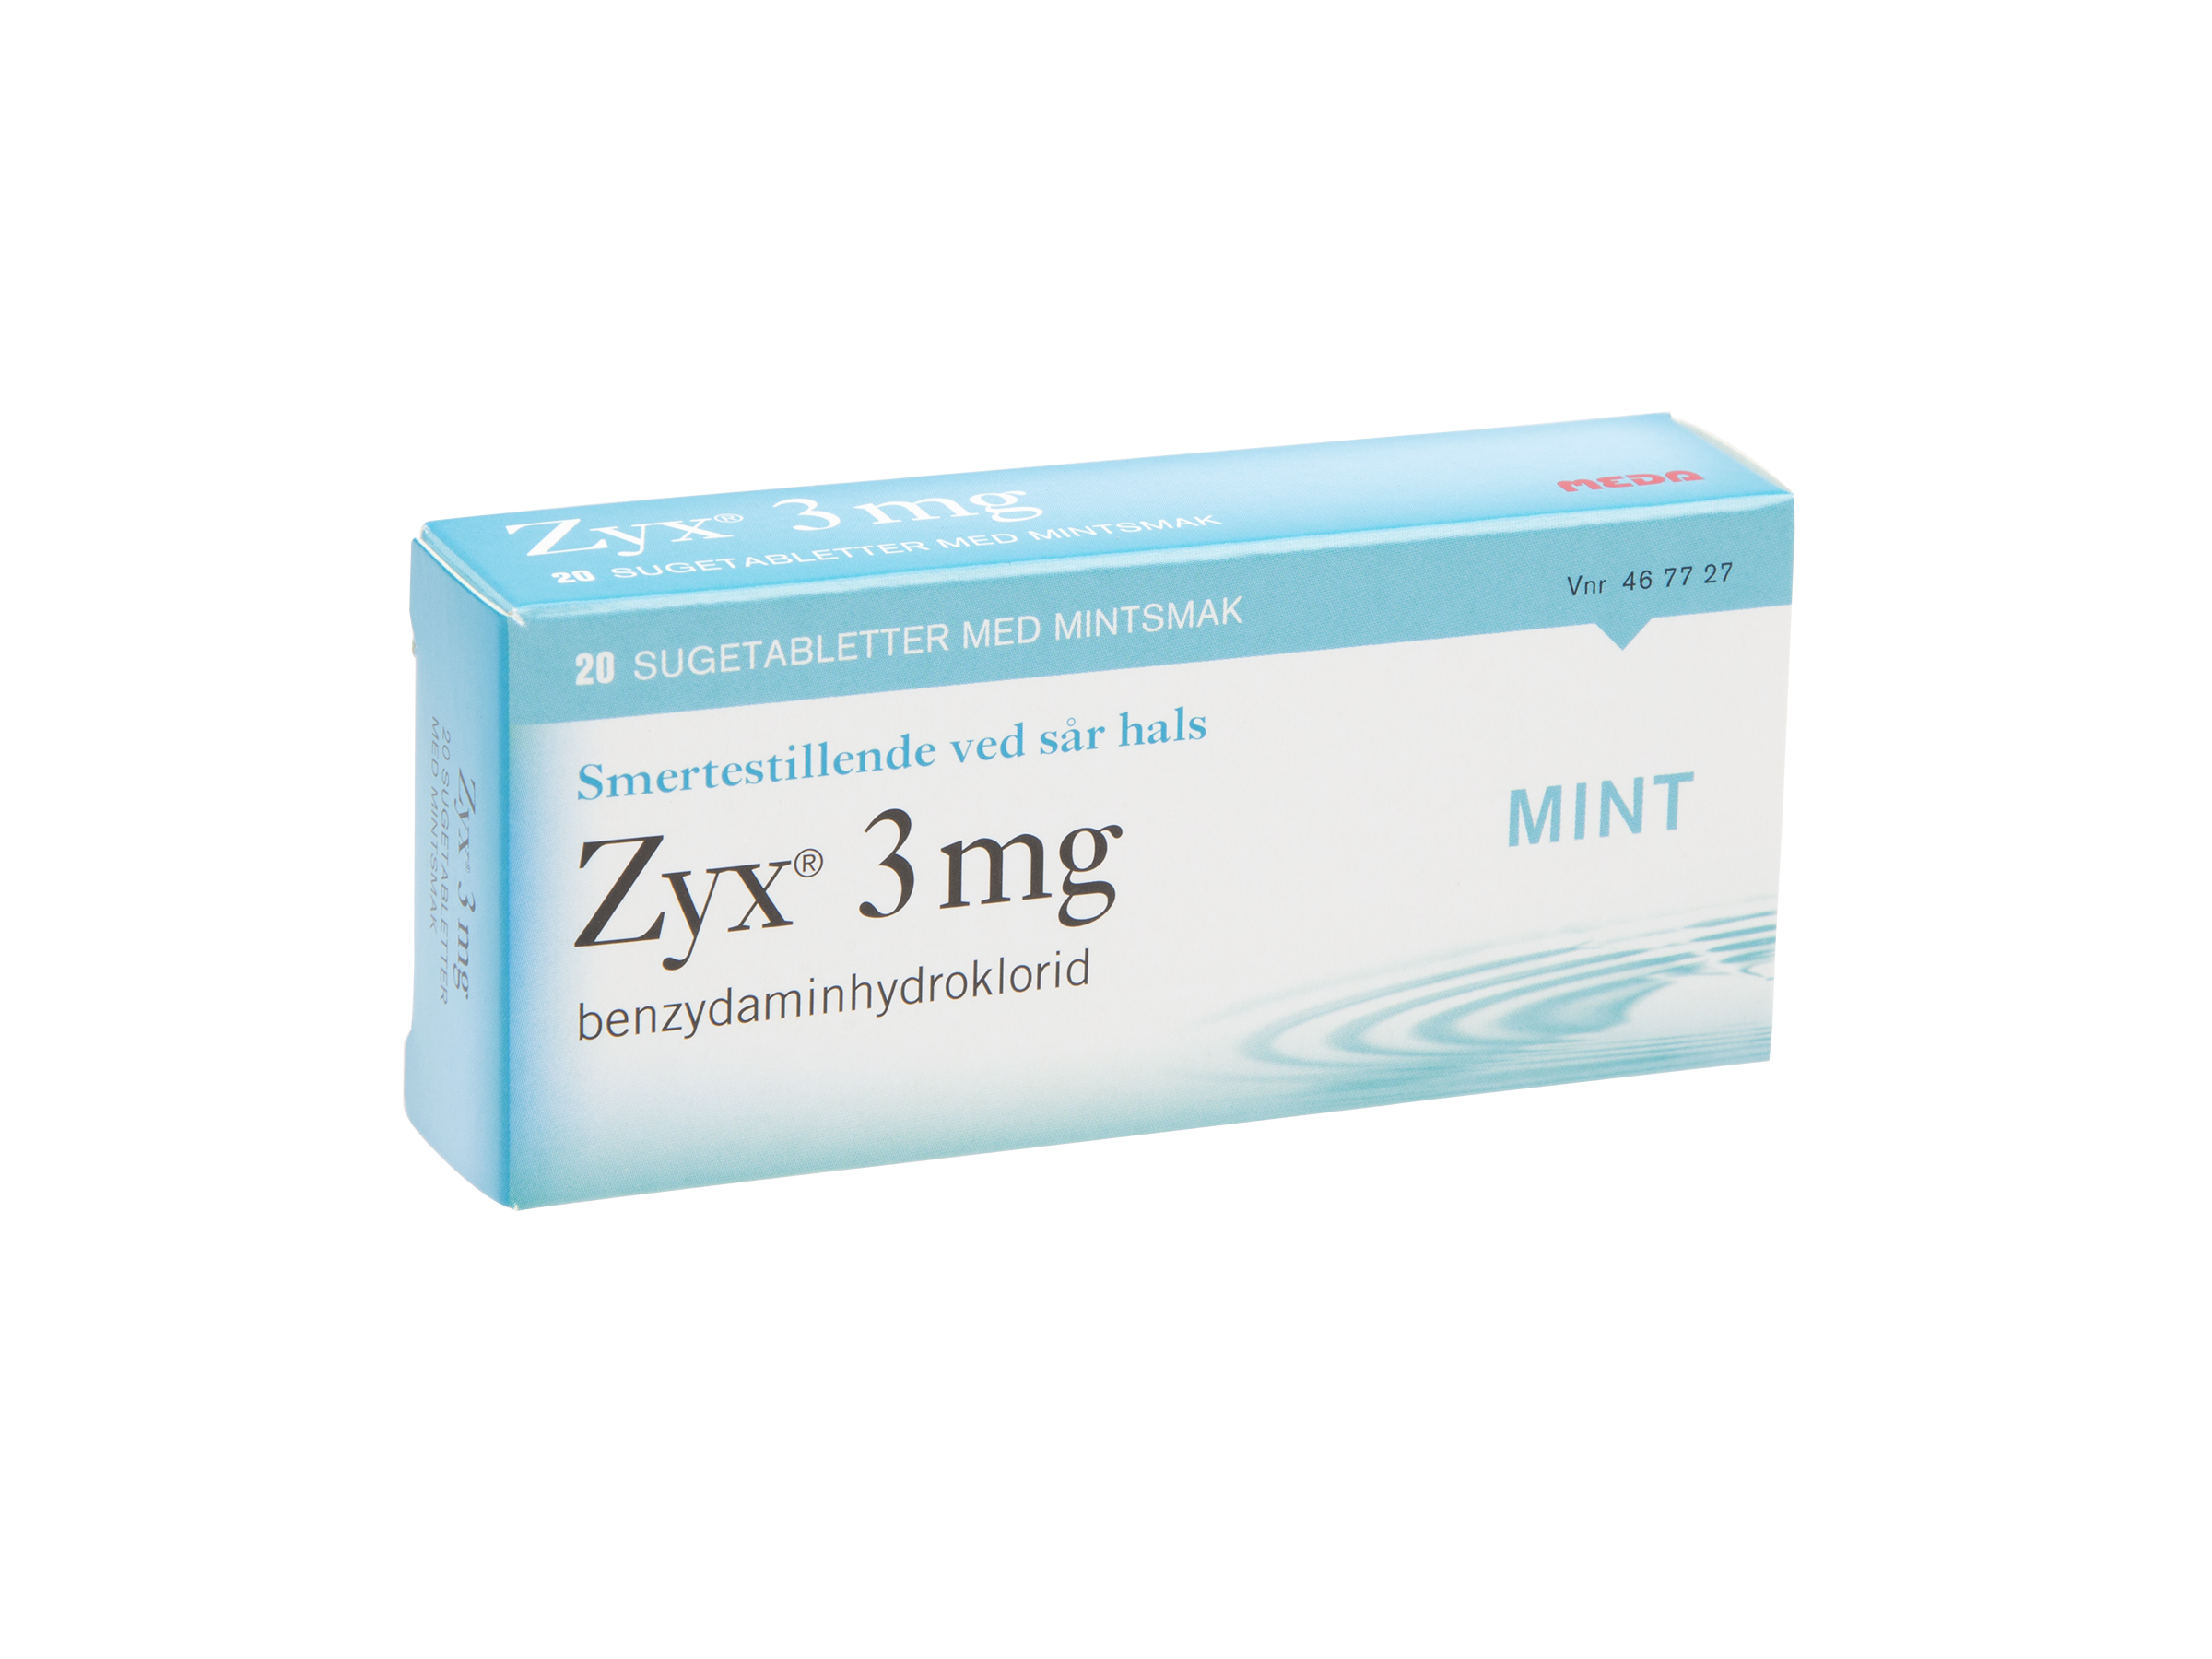 Zyx 3 mg mint sugetabletter, 2 x 10 stk.